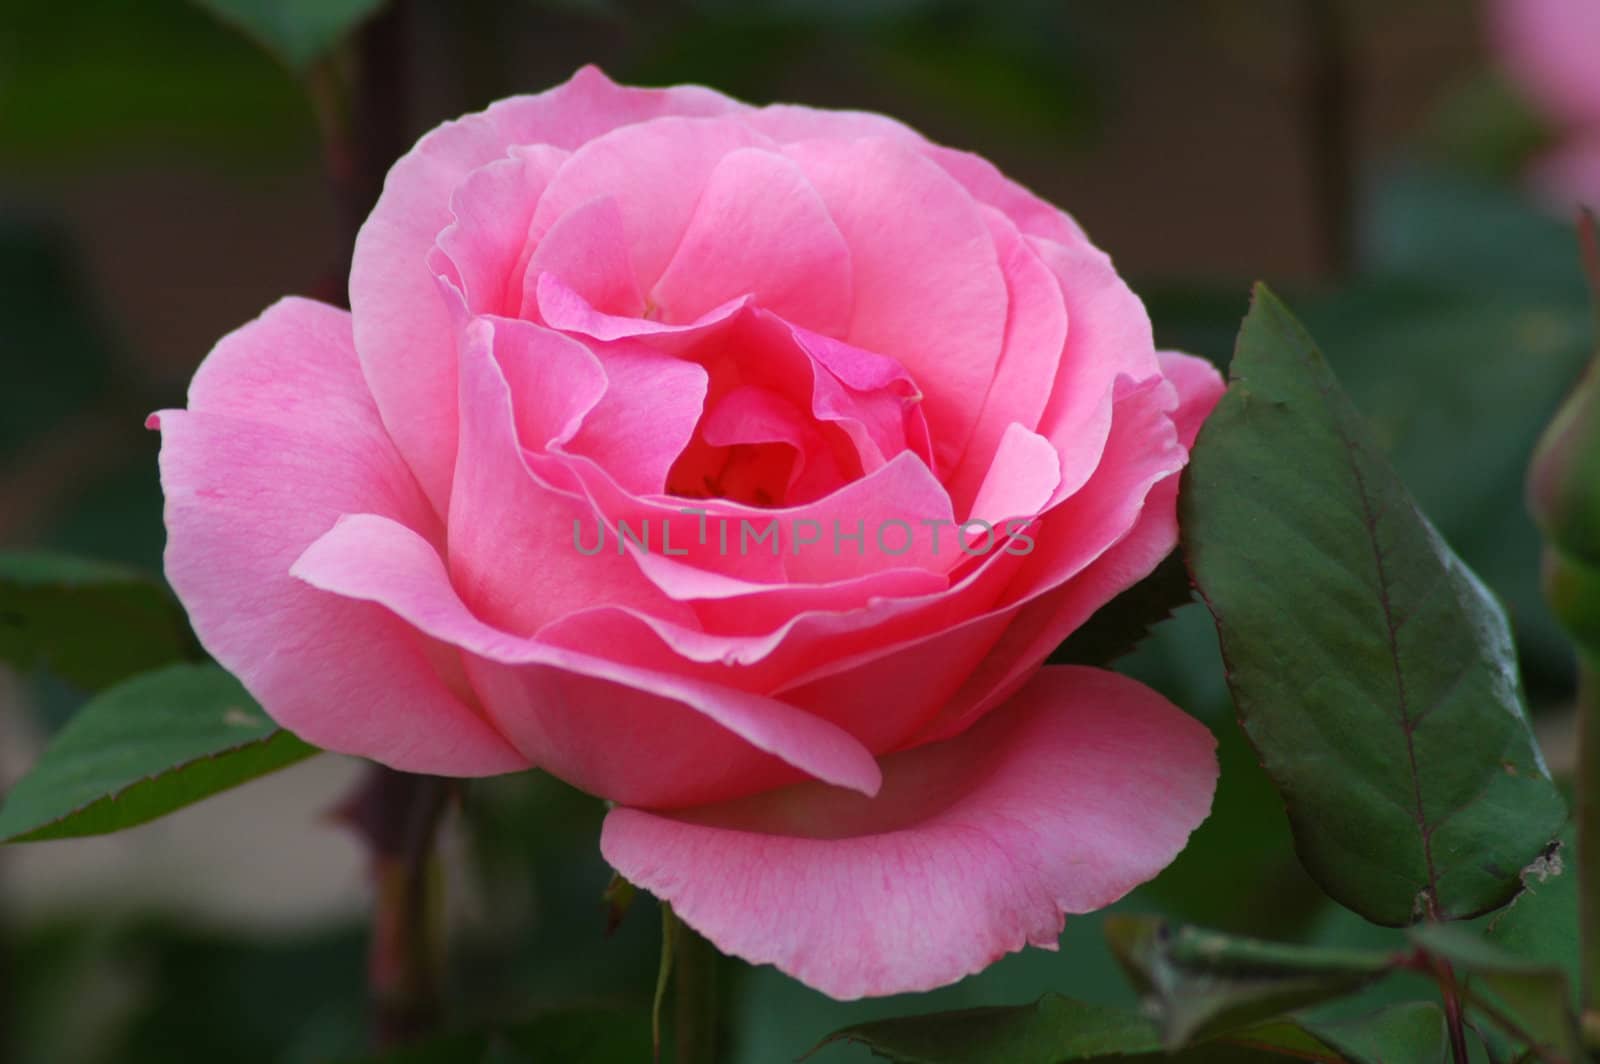 pink rose, green leafs, rose is sharp, background is blurred